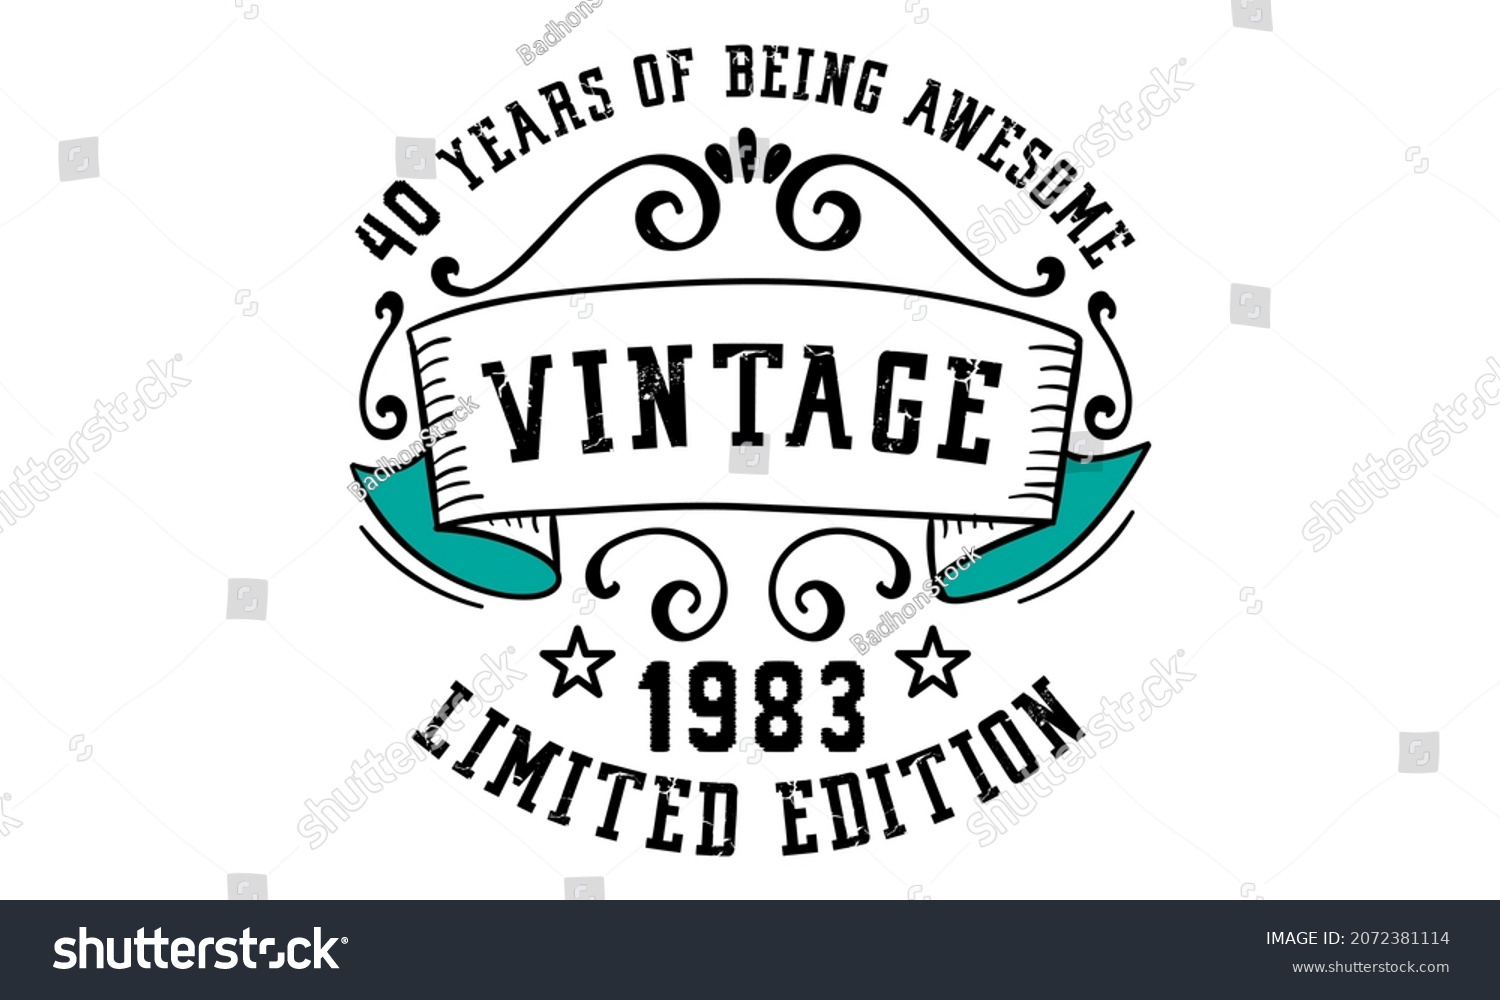 SVG of 40 Years of Being Awesome Vintage Limited Edition 1983 Graphic. It's able to print on T-shirt, mug, sticker, gift card, hoodie, wallpaper, hat and much more. svg